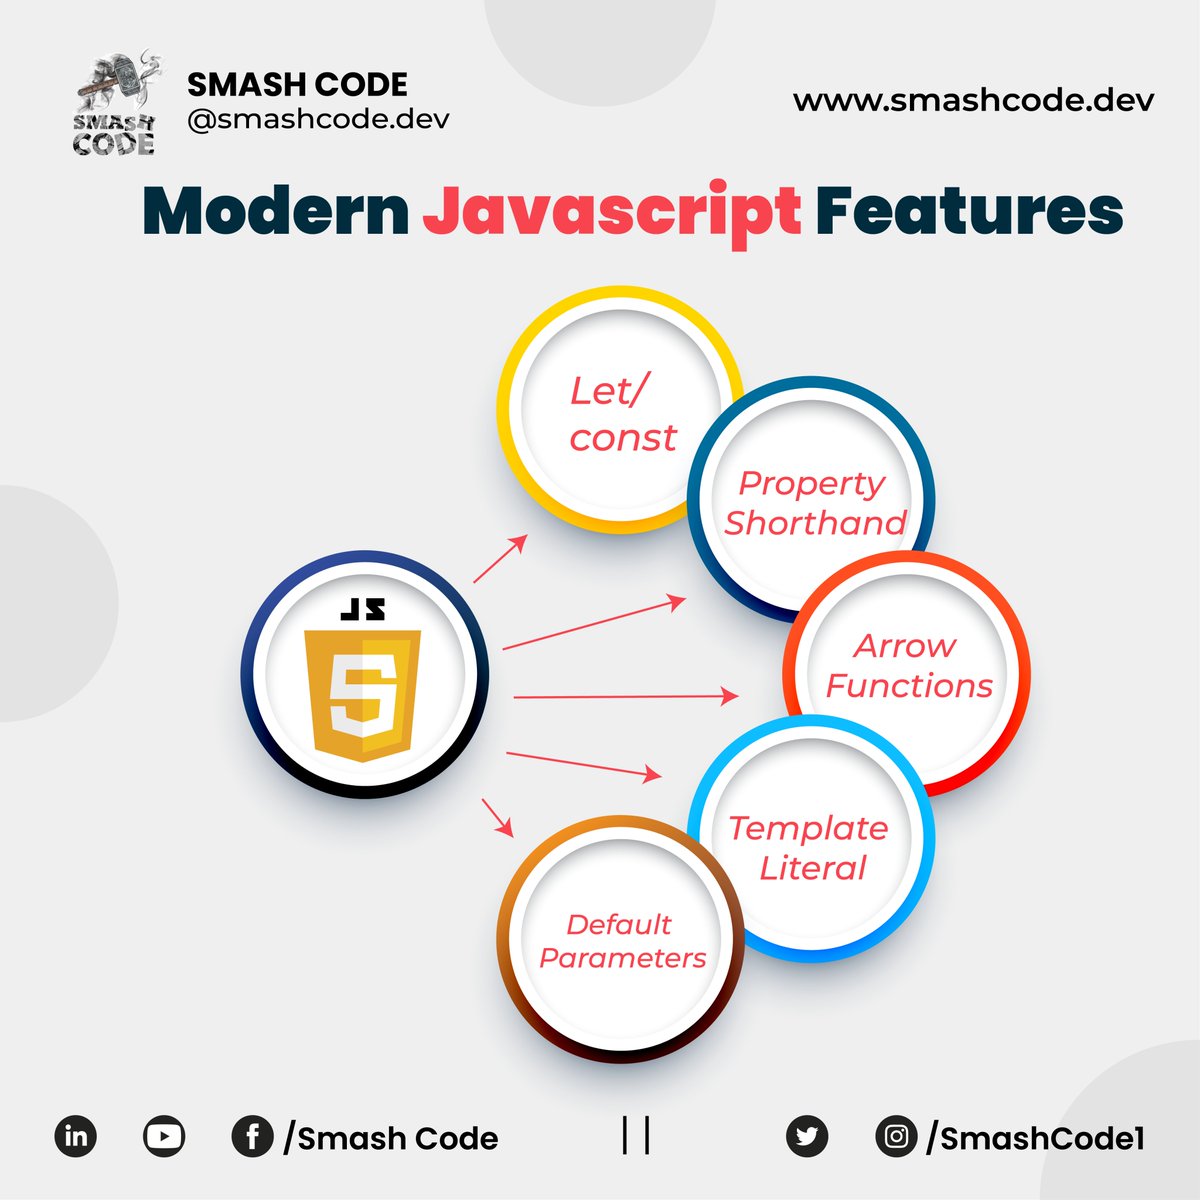 ' Modern Javascript Features '
Web link in the first comment...
#smashcode #letsconnect #javafullstackdeveloper #javafullstack #javascripttutorials #java #javajavajava #javaprogrammer #javascript #javadeveloper #javascripts #javascriptdevelopers #javaprogramming  #onlineearnings